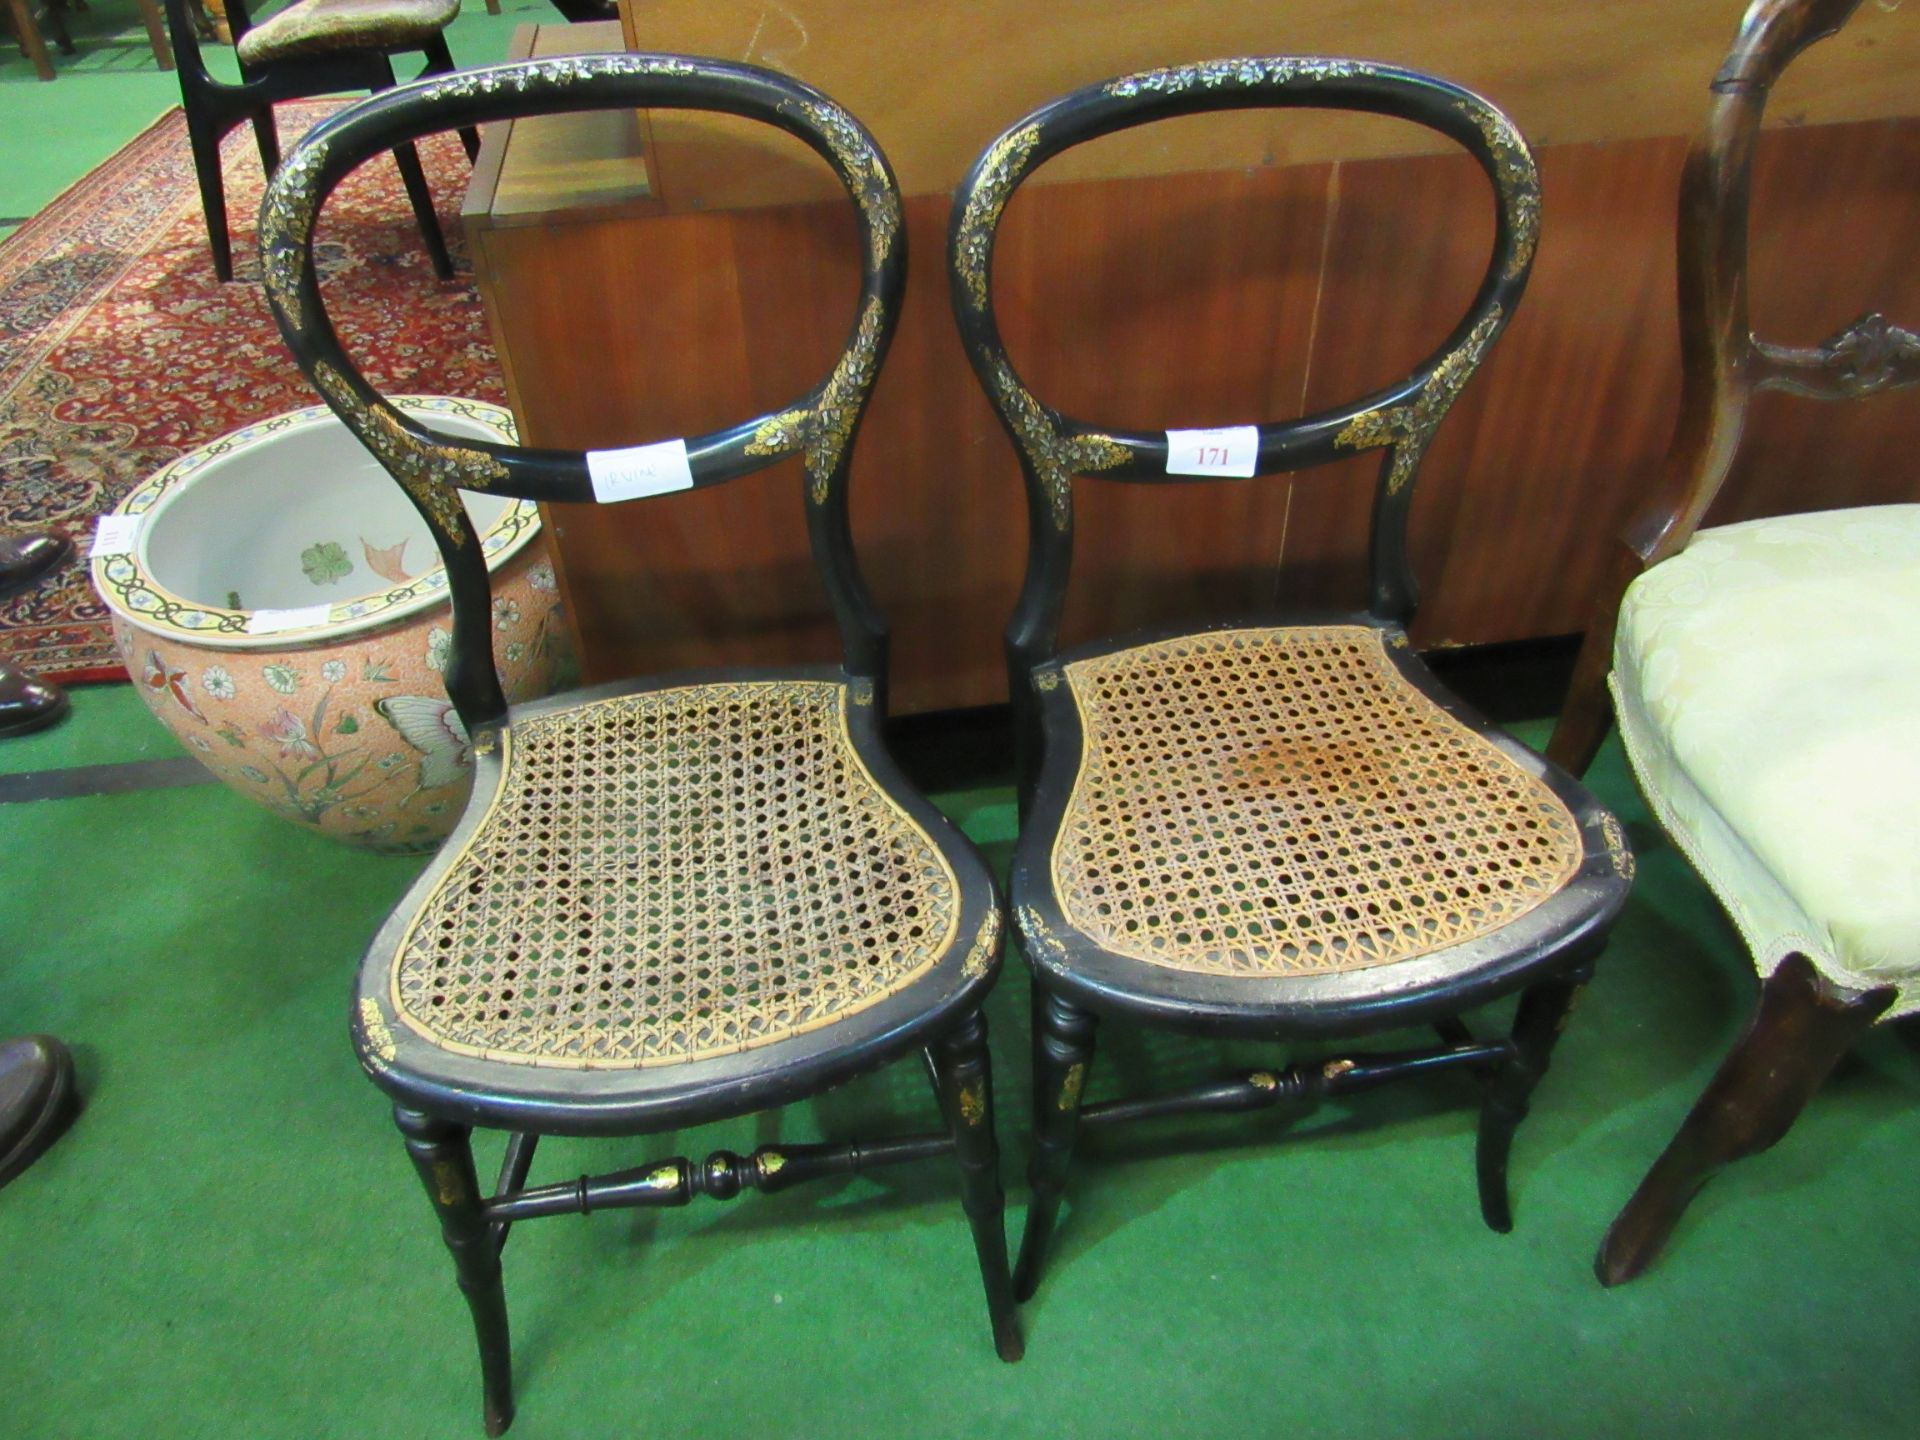 2 ebonised and mother of pearl decorated cane seat bedroom chairs.